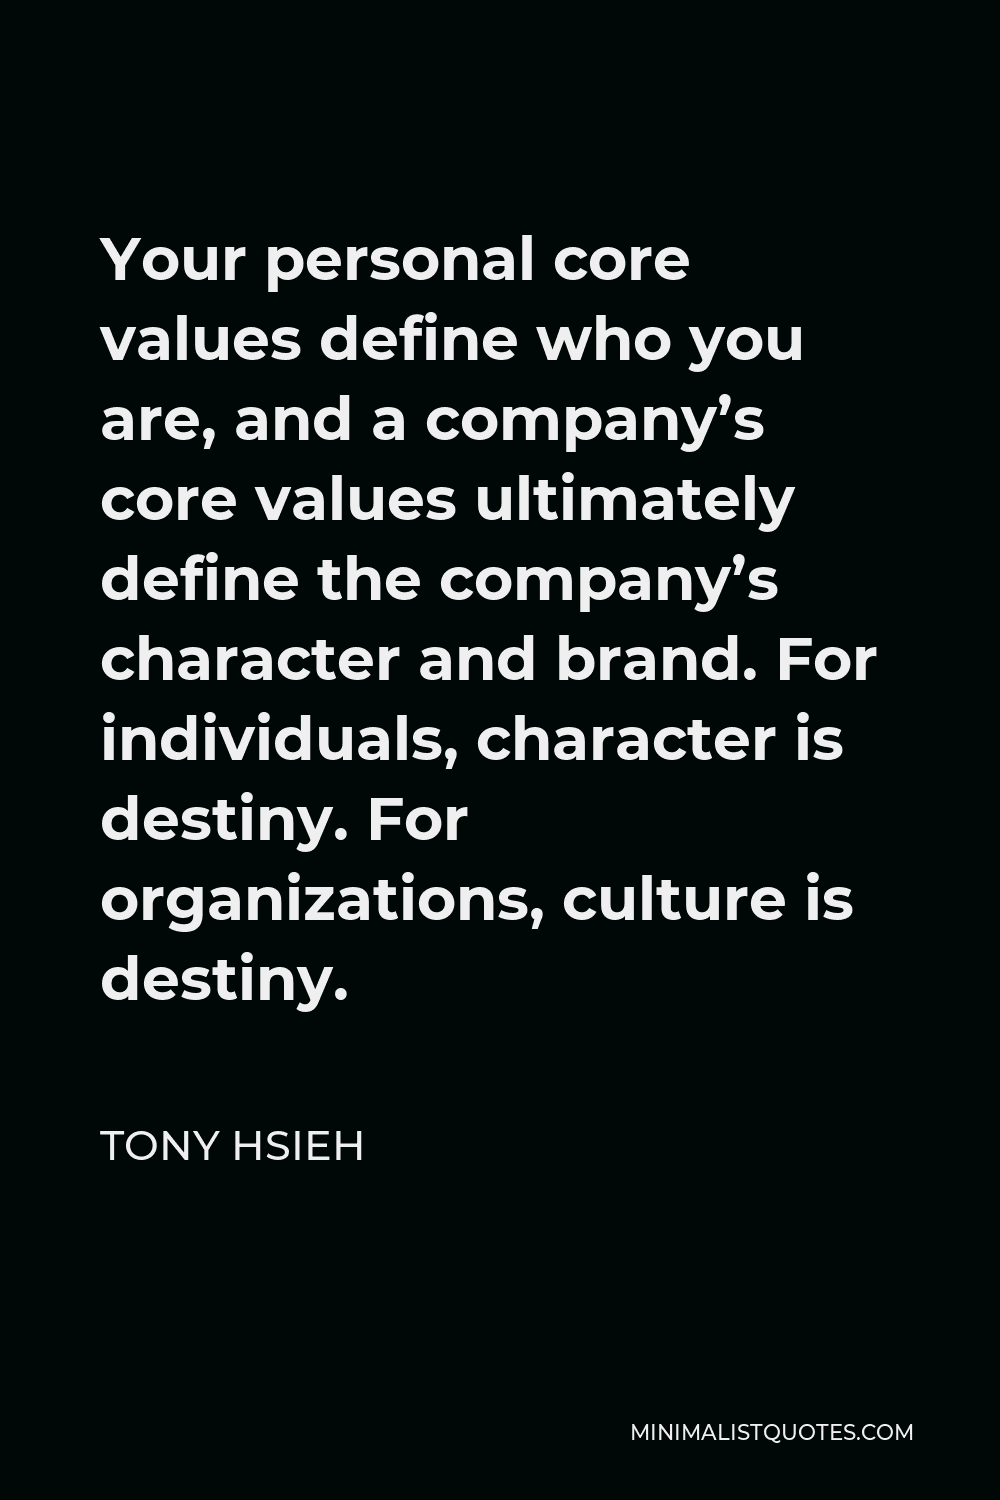 Tony Hsieh Quote - Your personal core values define who you are, and a company’s core values ultimately define the company’s character and brand. For individuals, character is destiny. For organizations, culture is destiny.